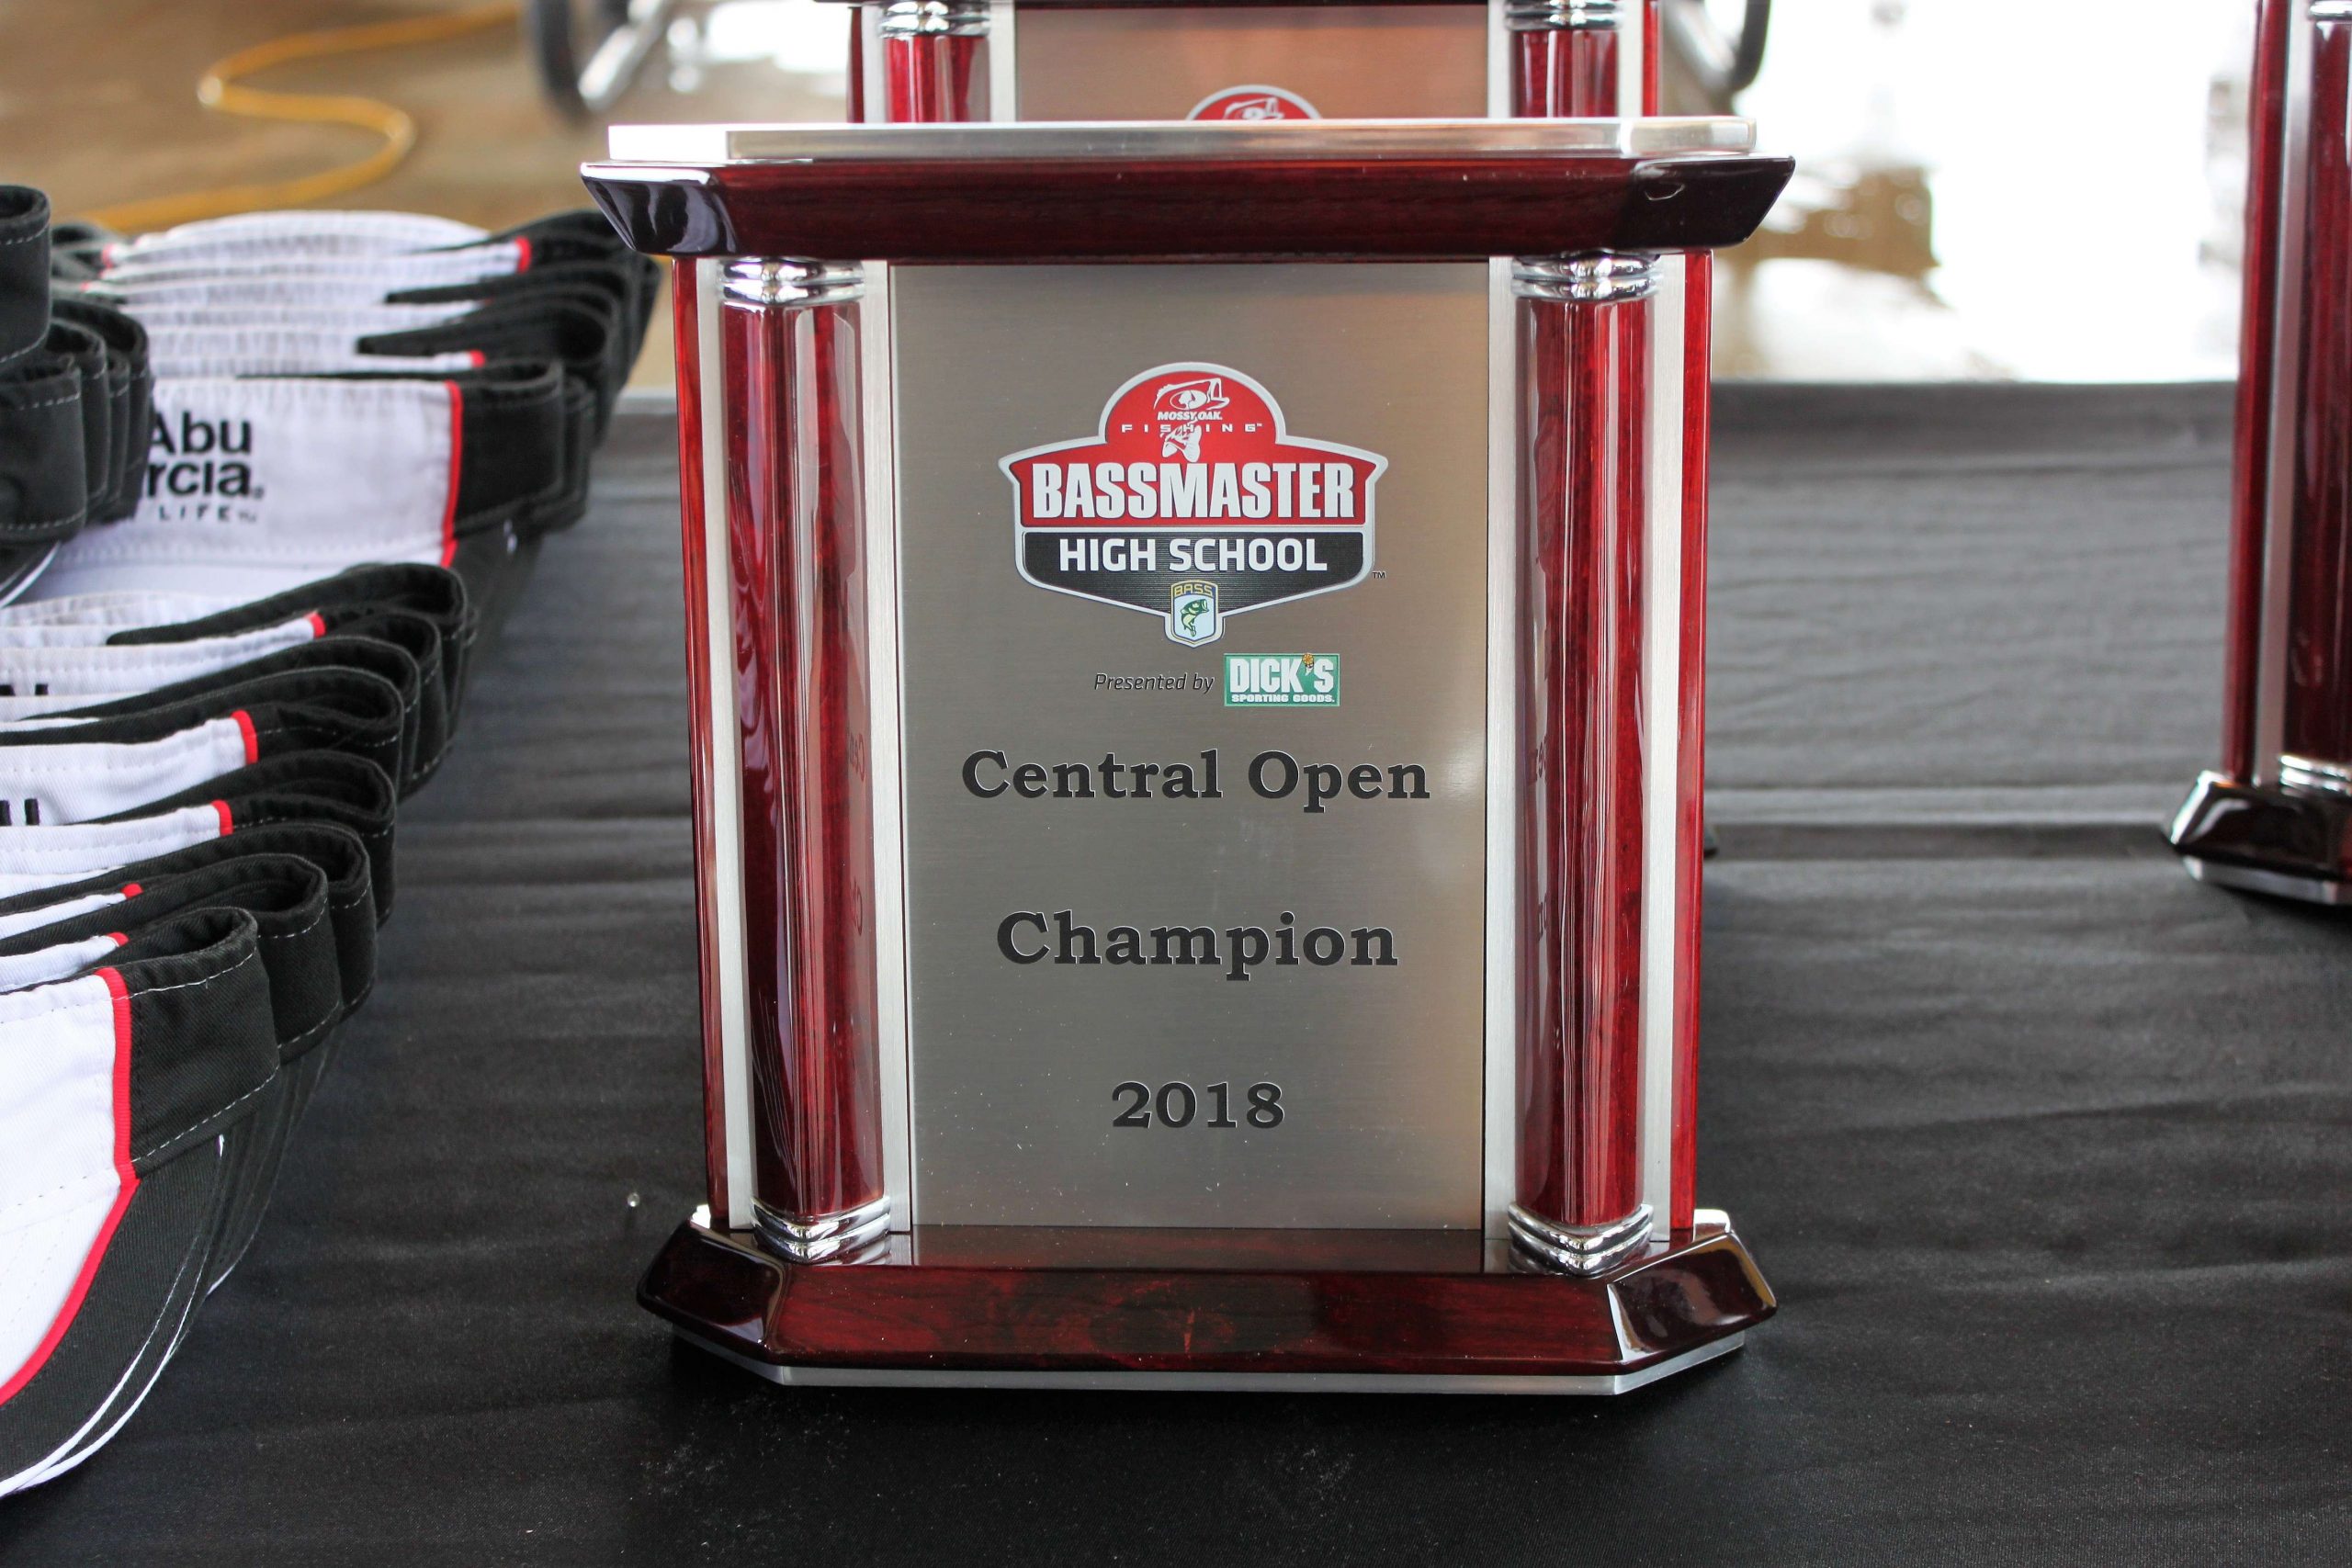 f course, everyone would prefer to win this piece of championship hardware.